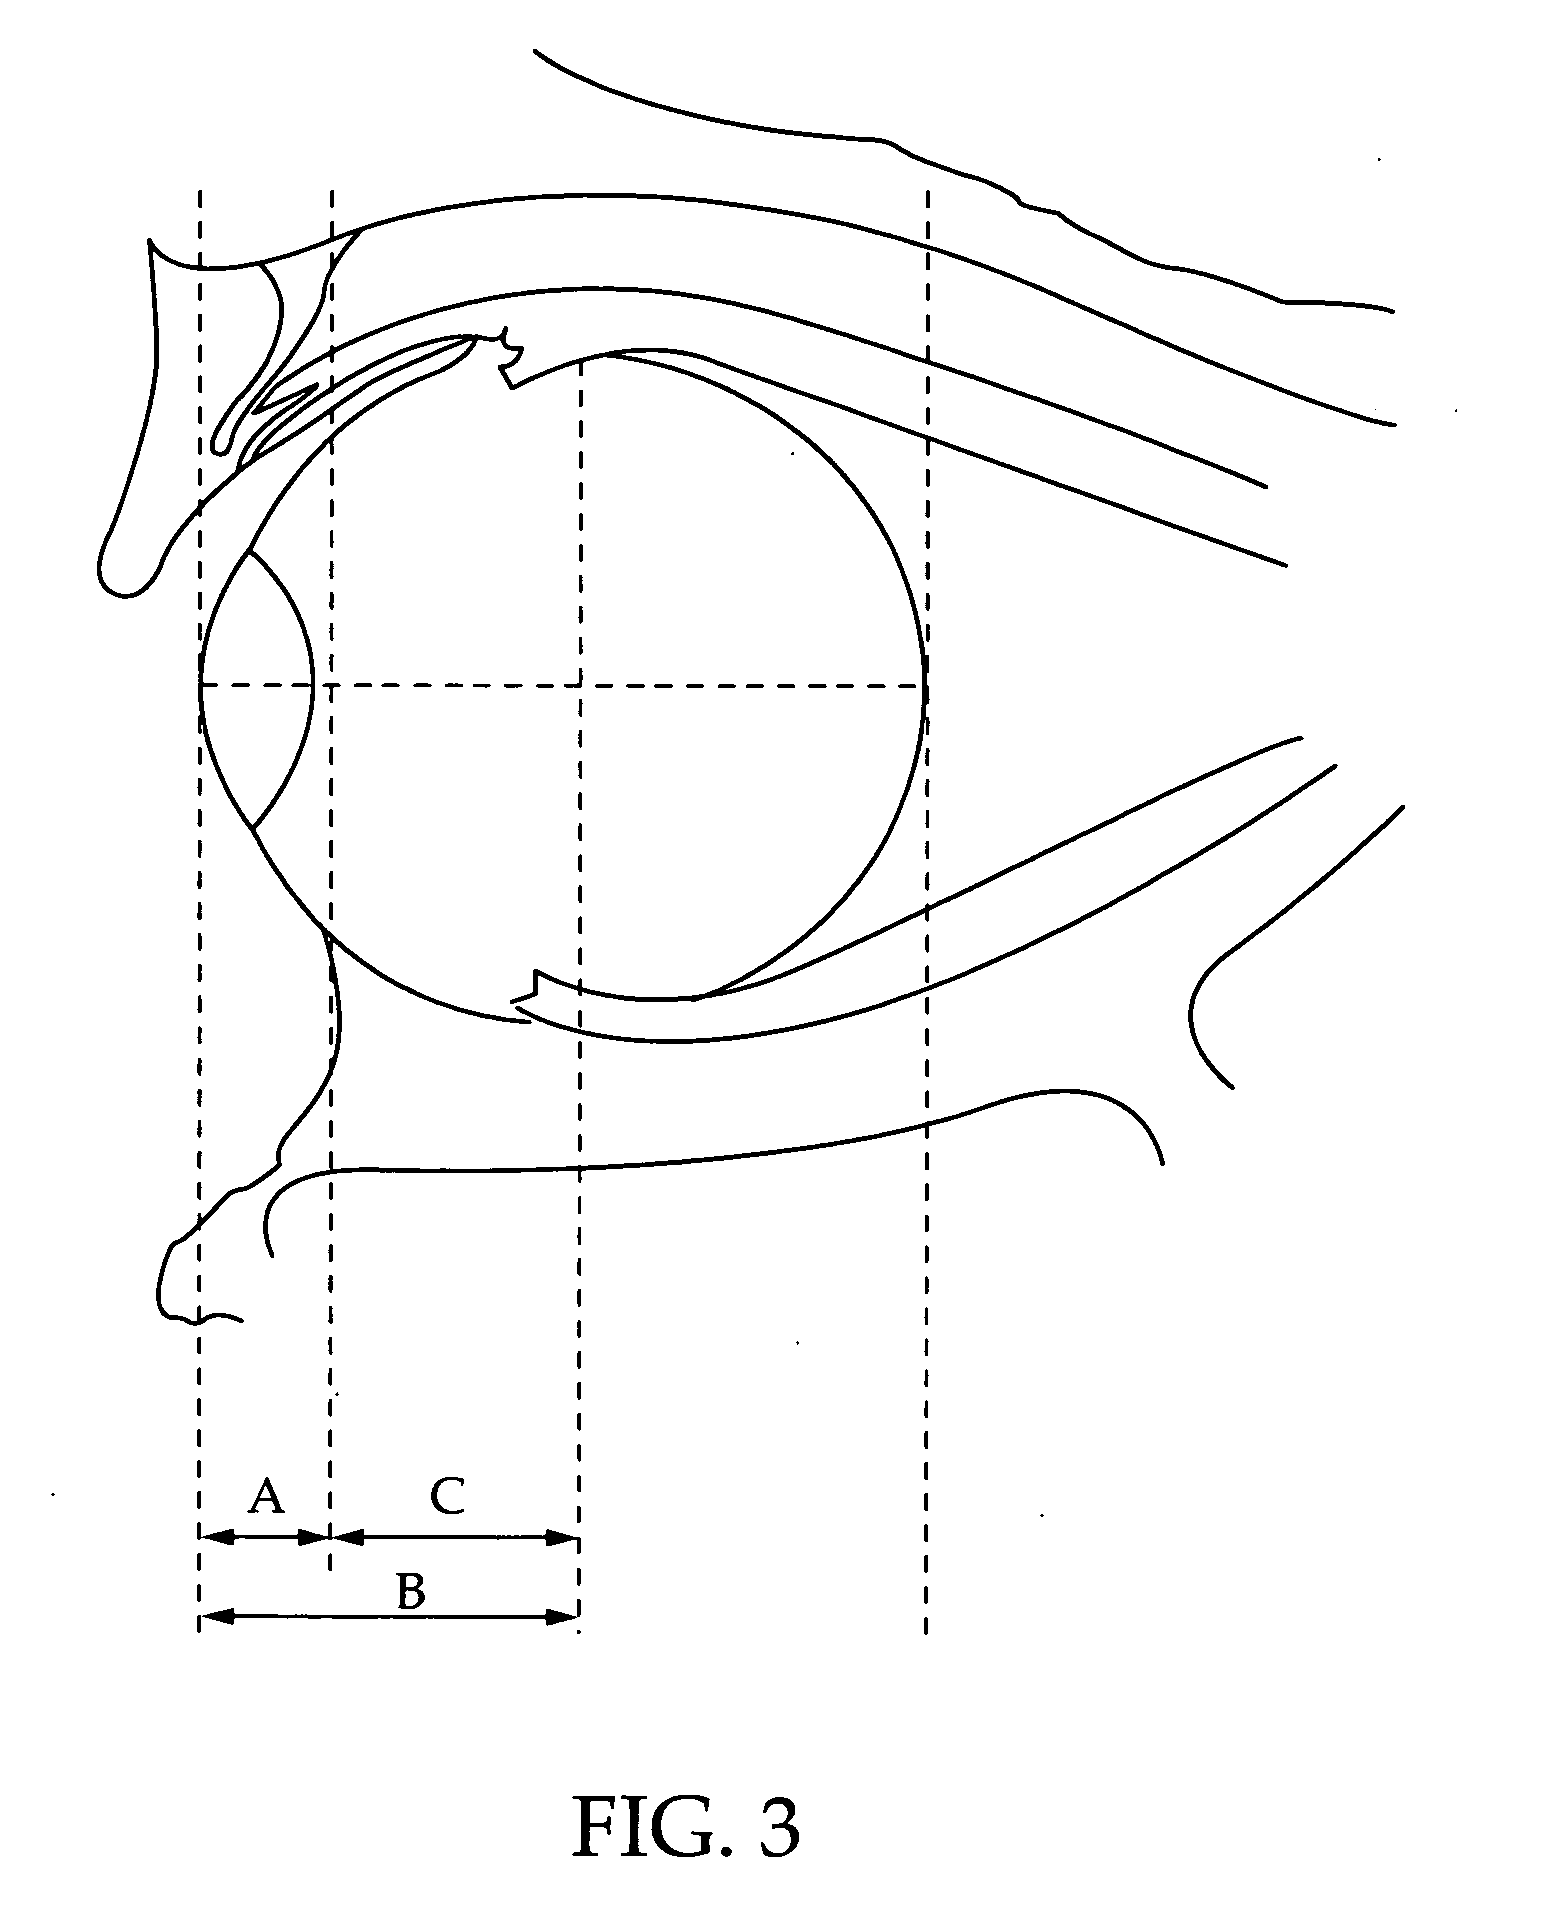 Insertion mechanism for use with a syringe